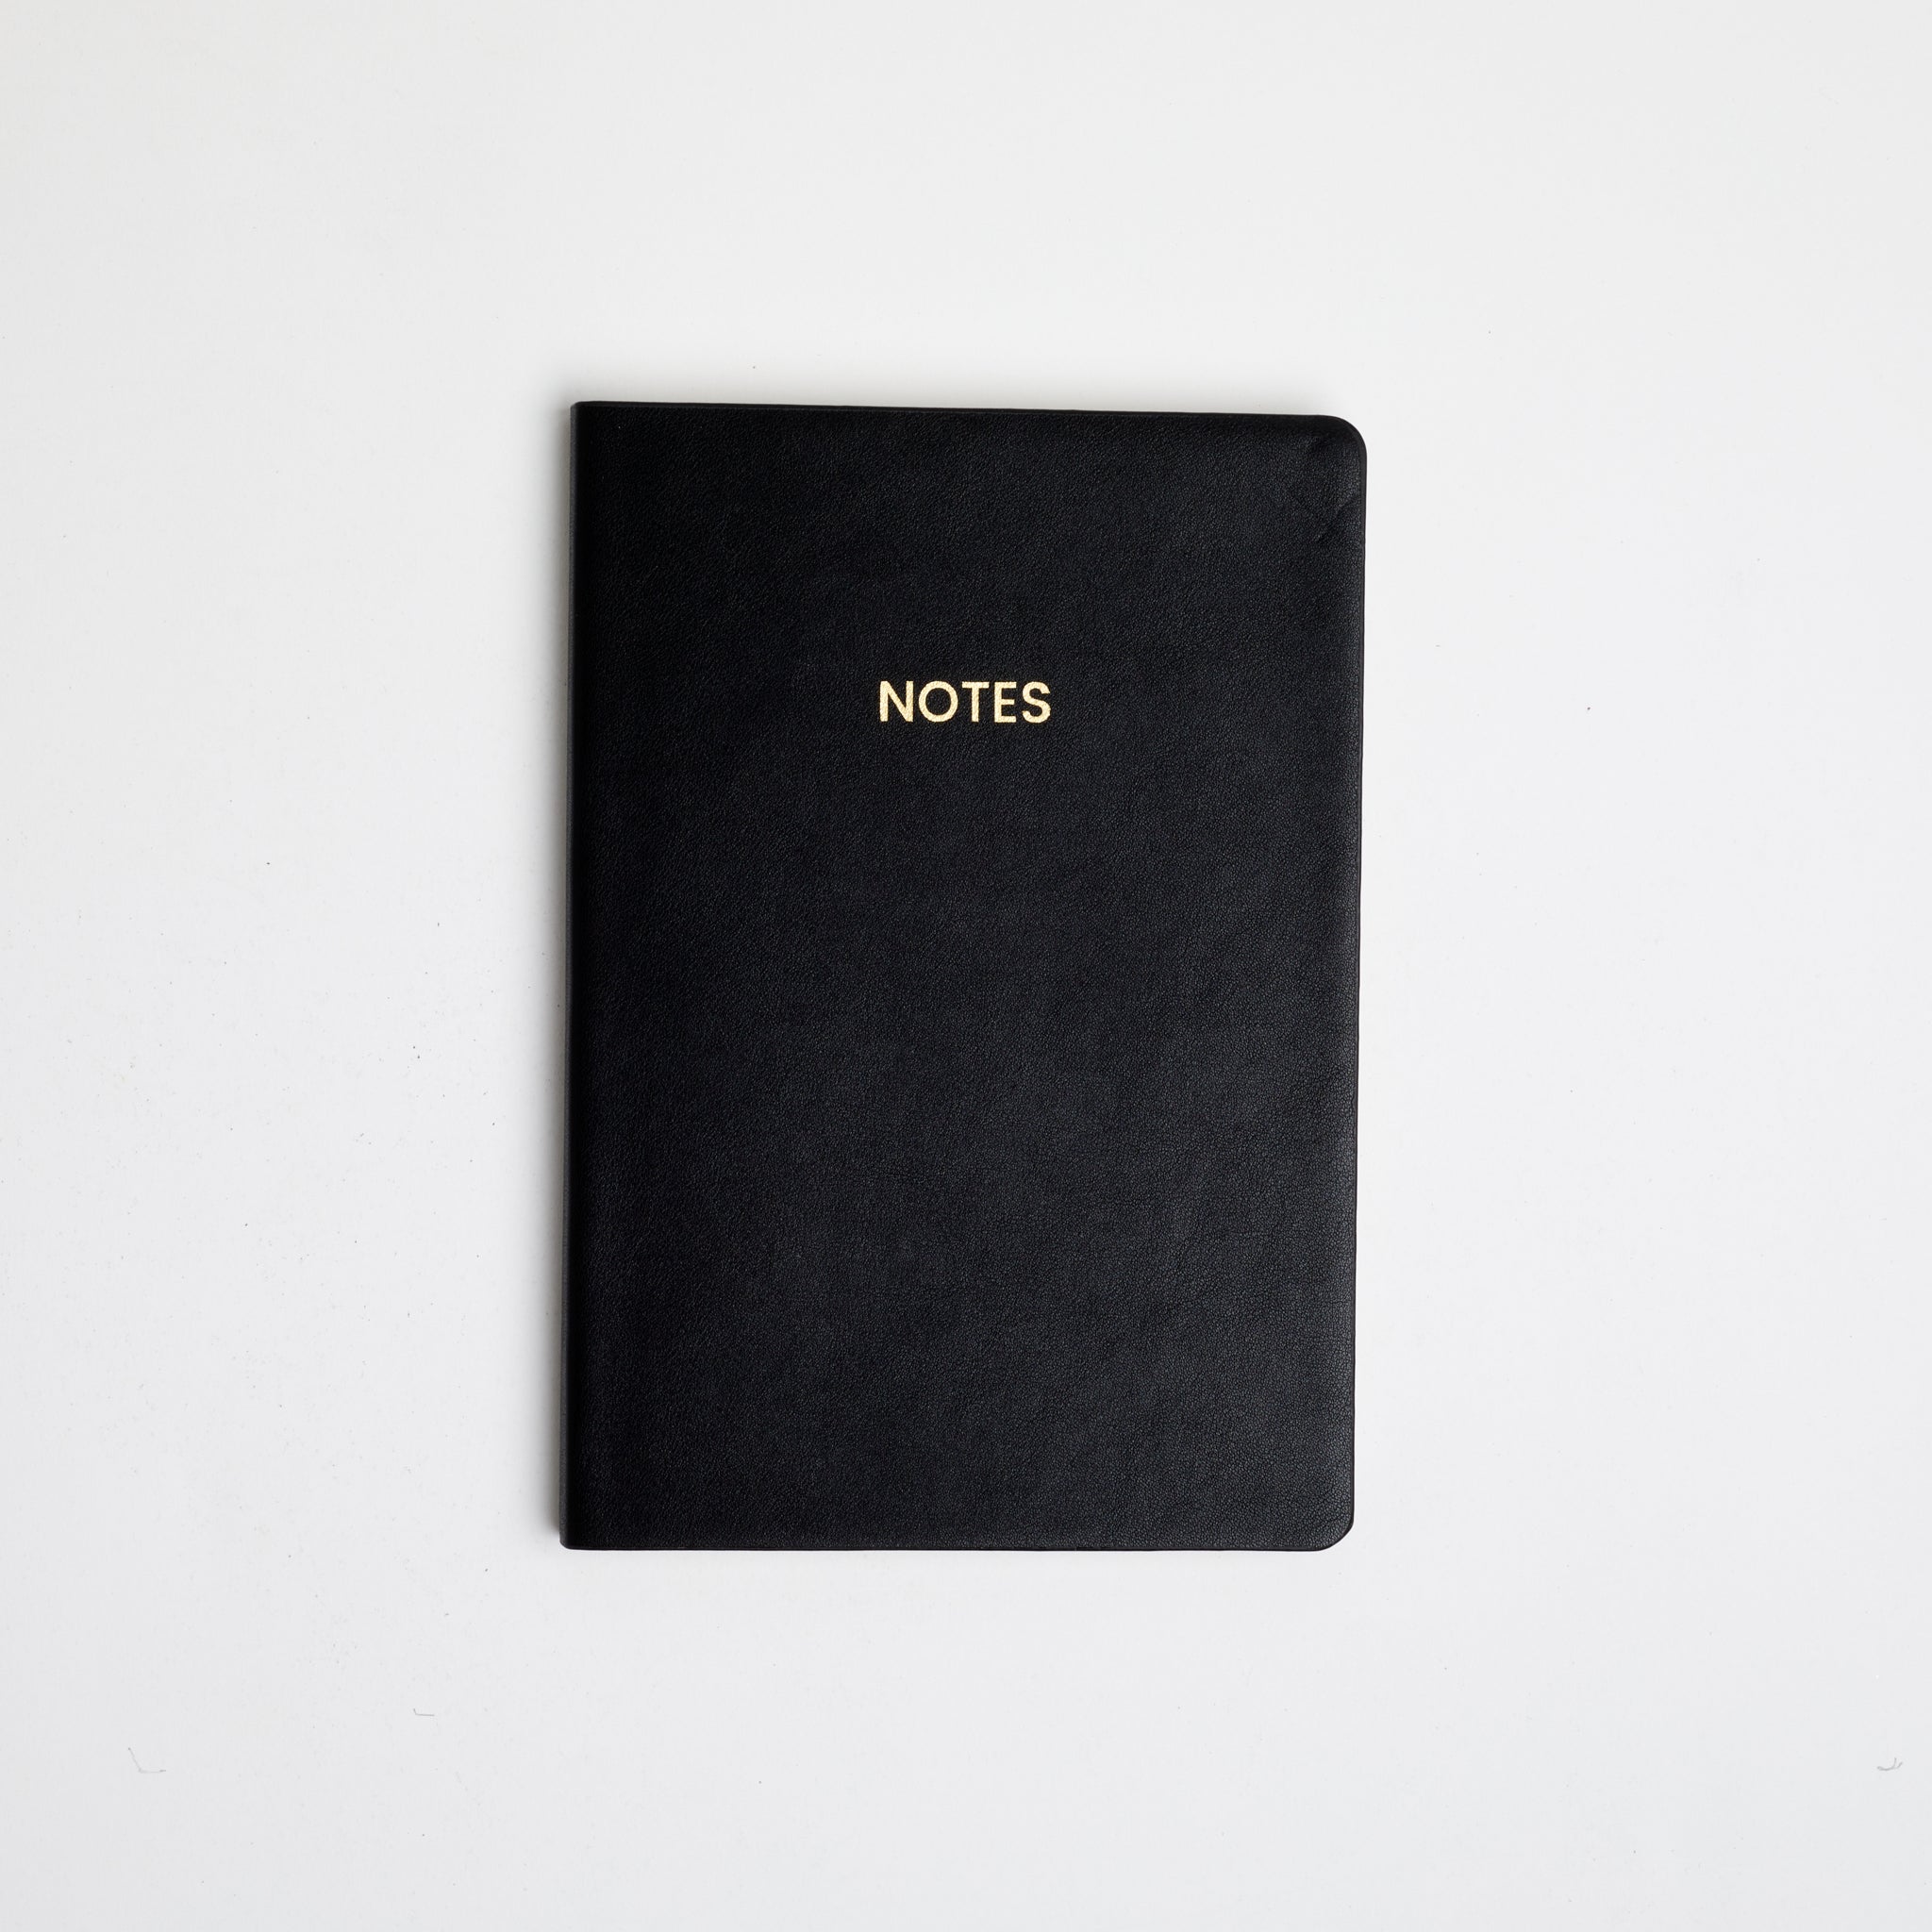 A black colored vegan leather notebook with gold foil text reading &quot;NOTES&quot; across the front photographed against a white background.